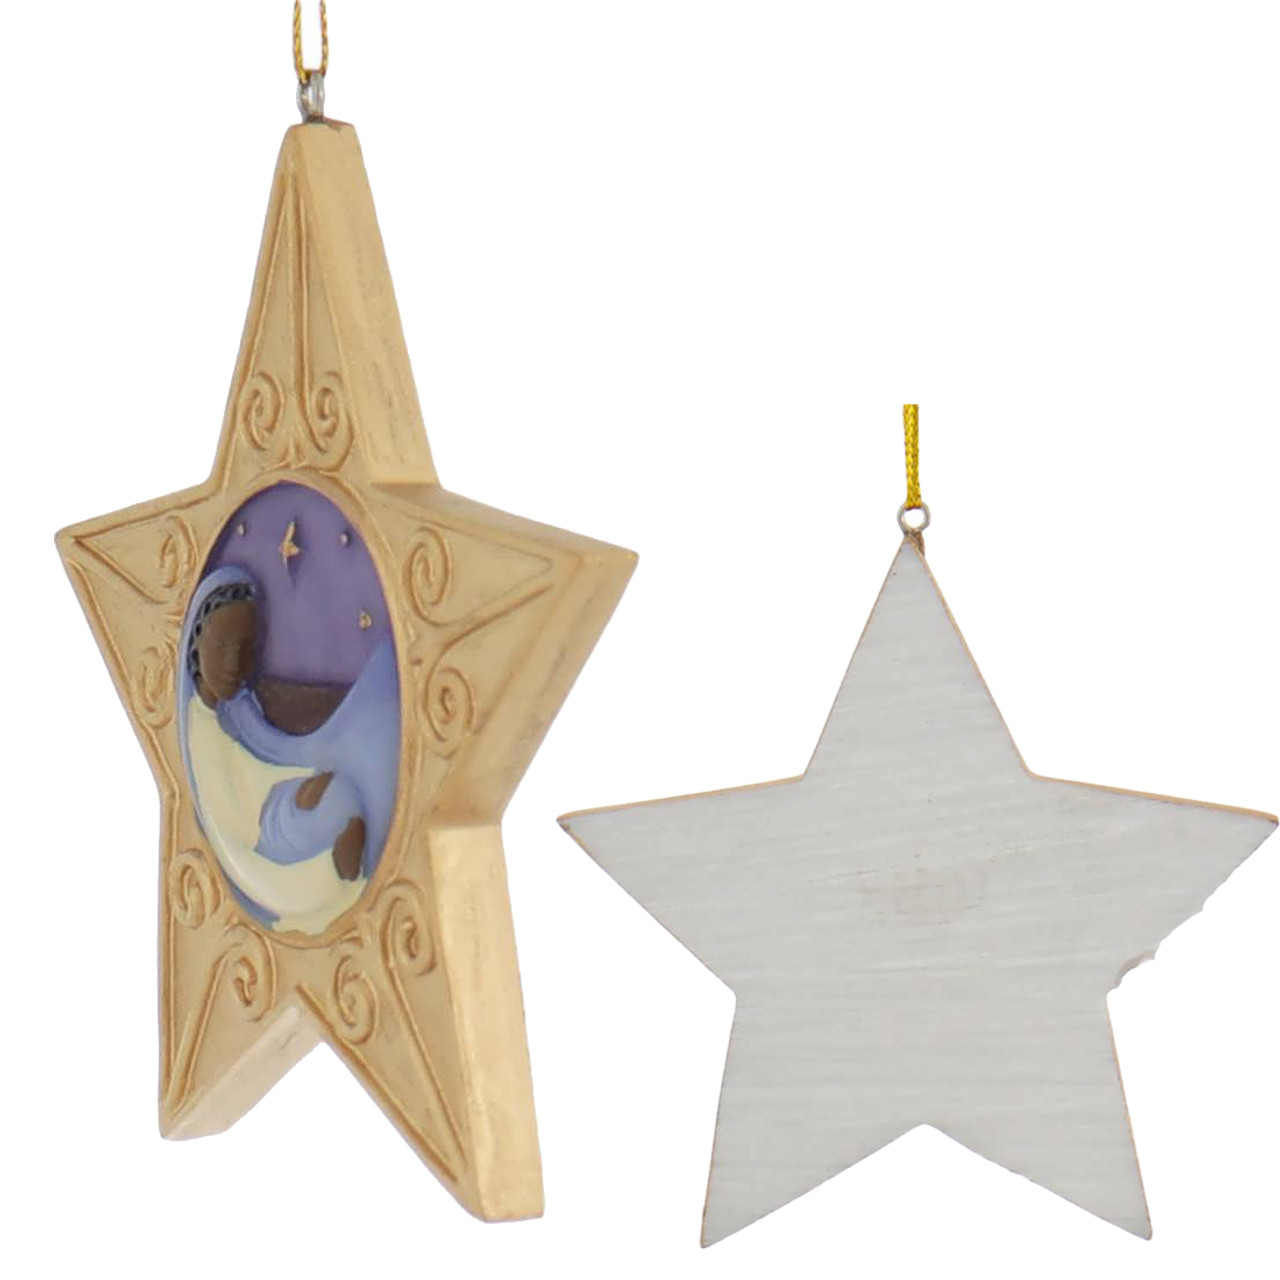 Velvet Ball Ornament (Set of 2) by Cody Foster and Co